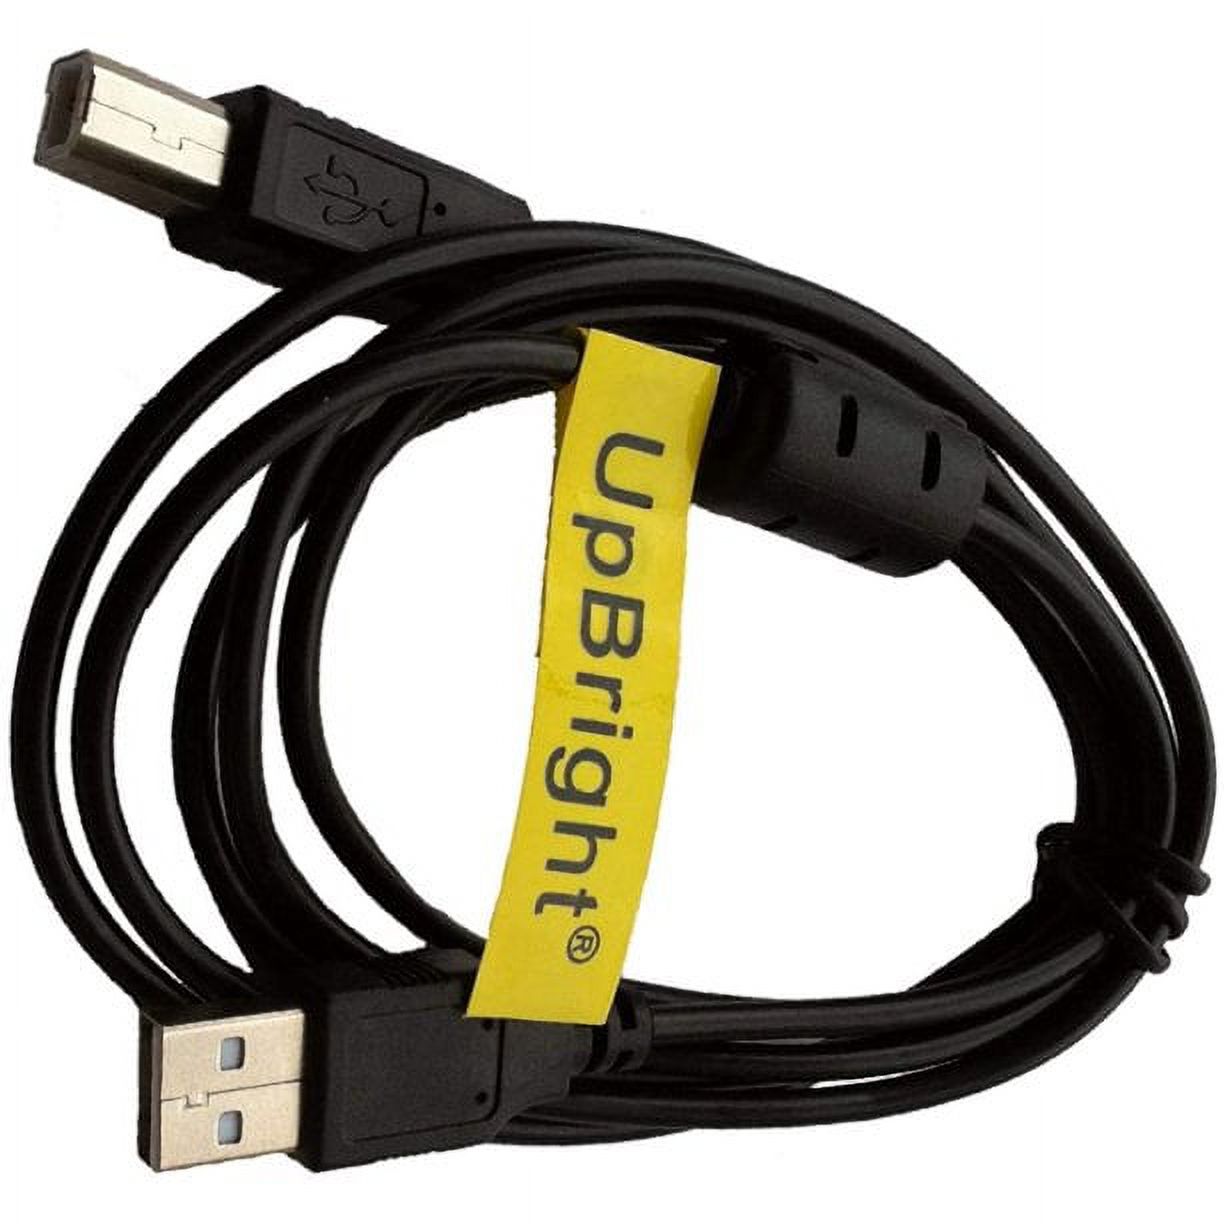 UPBRIGHT USB Cable Cord For Citizen CT-S310 CT-S310A CT-S310II CTS310 CT-S2000 CT-S2000PAU-BK CT-S2000PAU-WH Thermal POS Printer - image 2 of 3